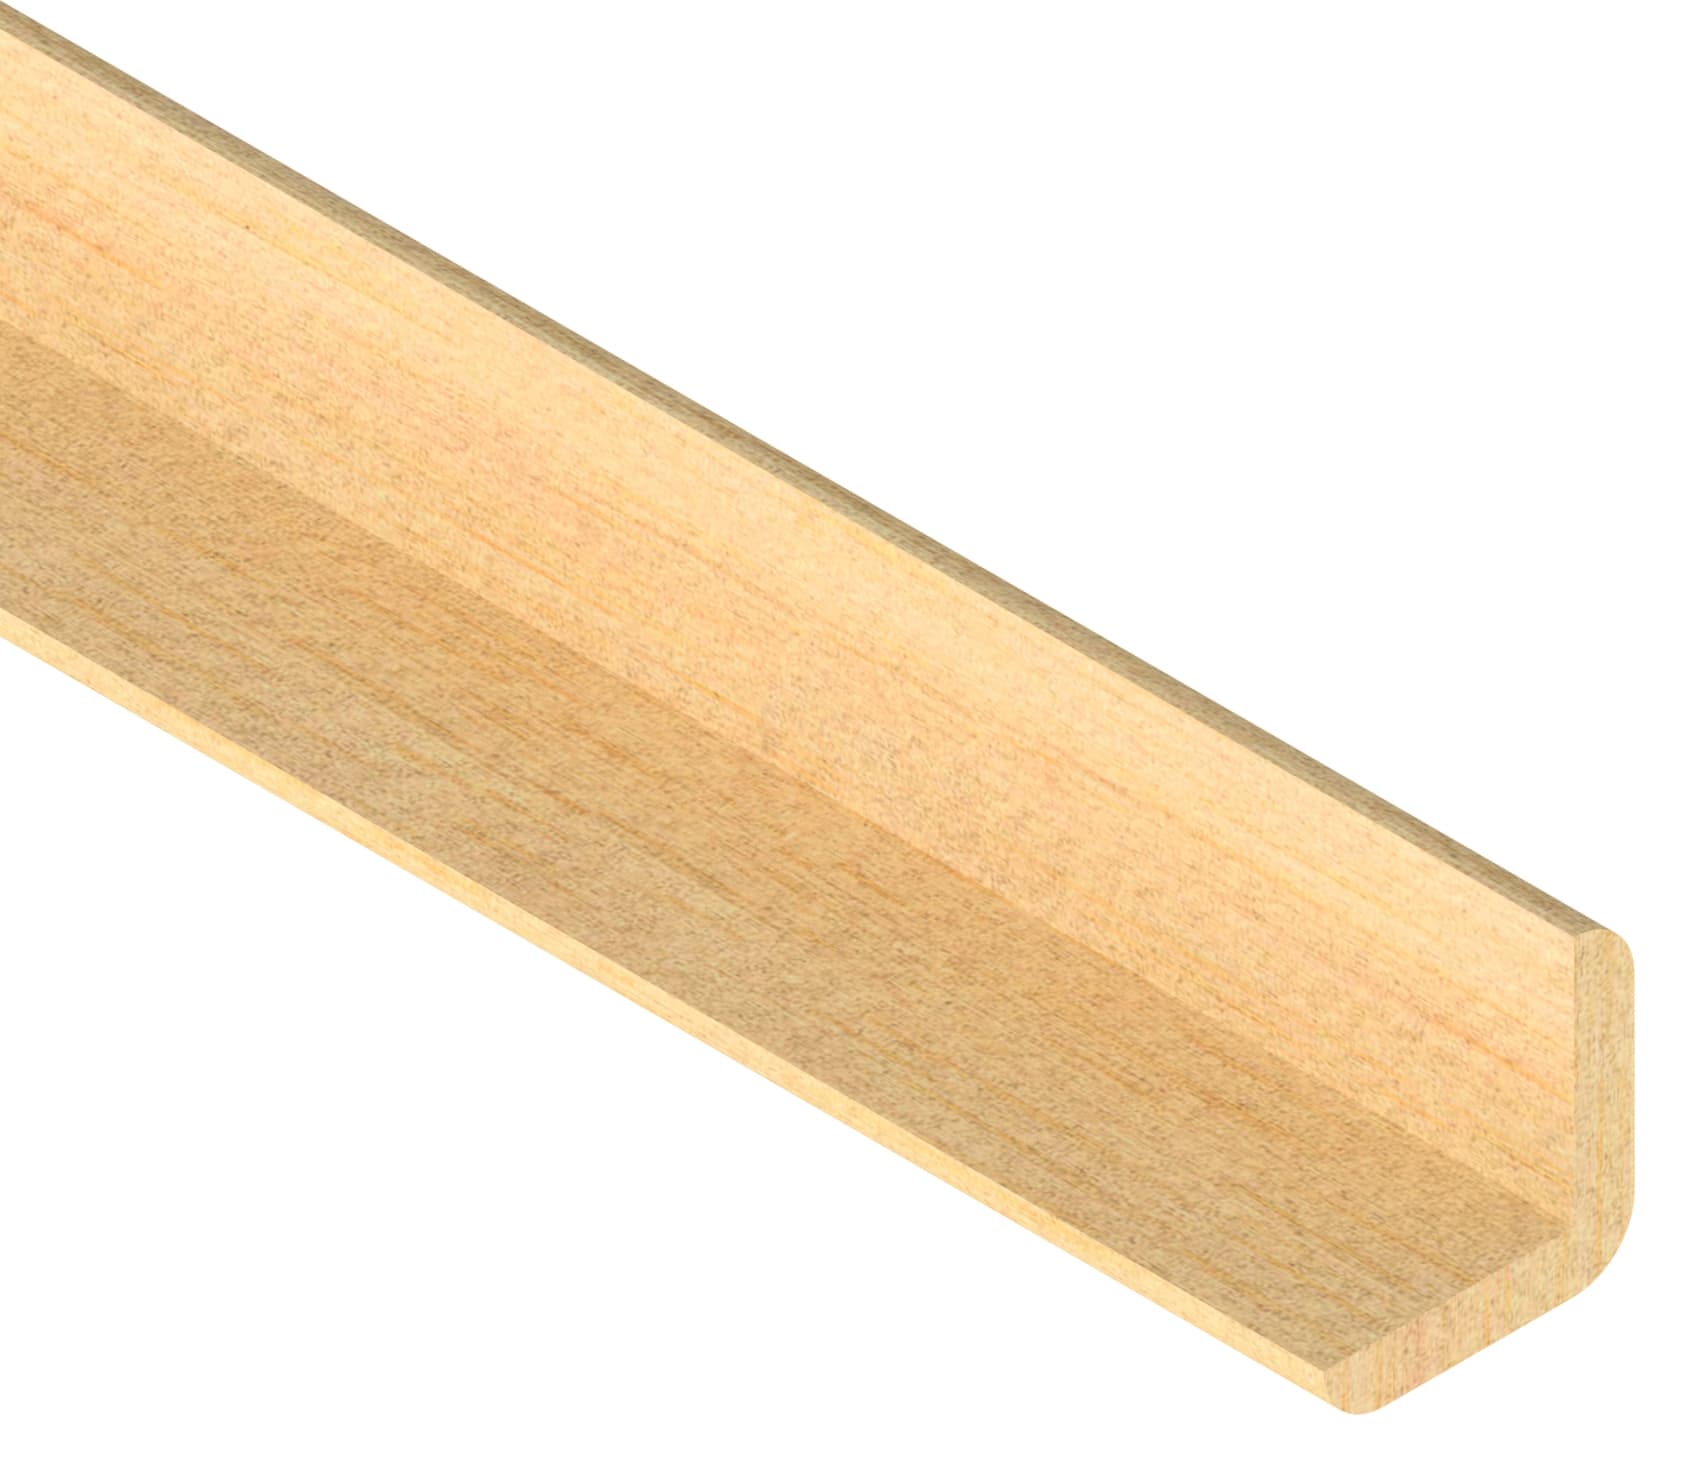 Cheshire Mouldings Pine Angle - 25x25x2400mm